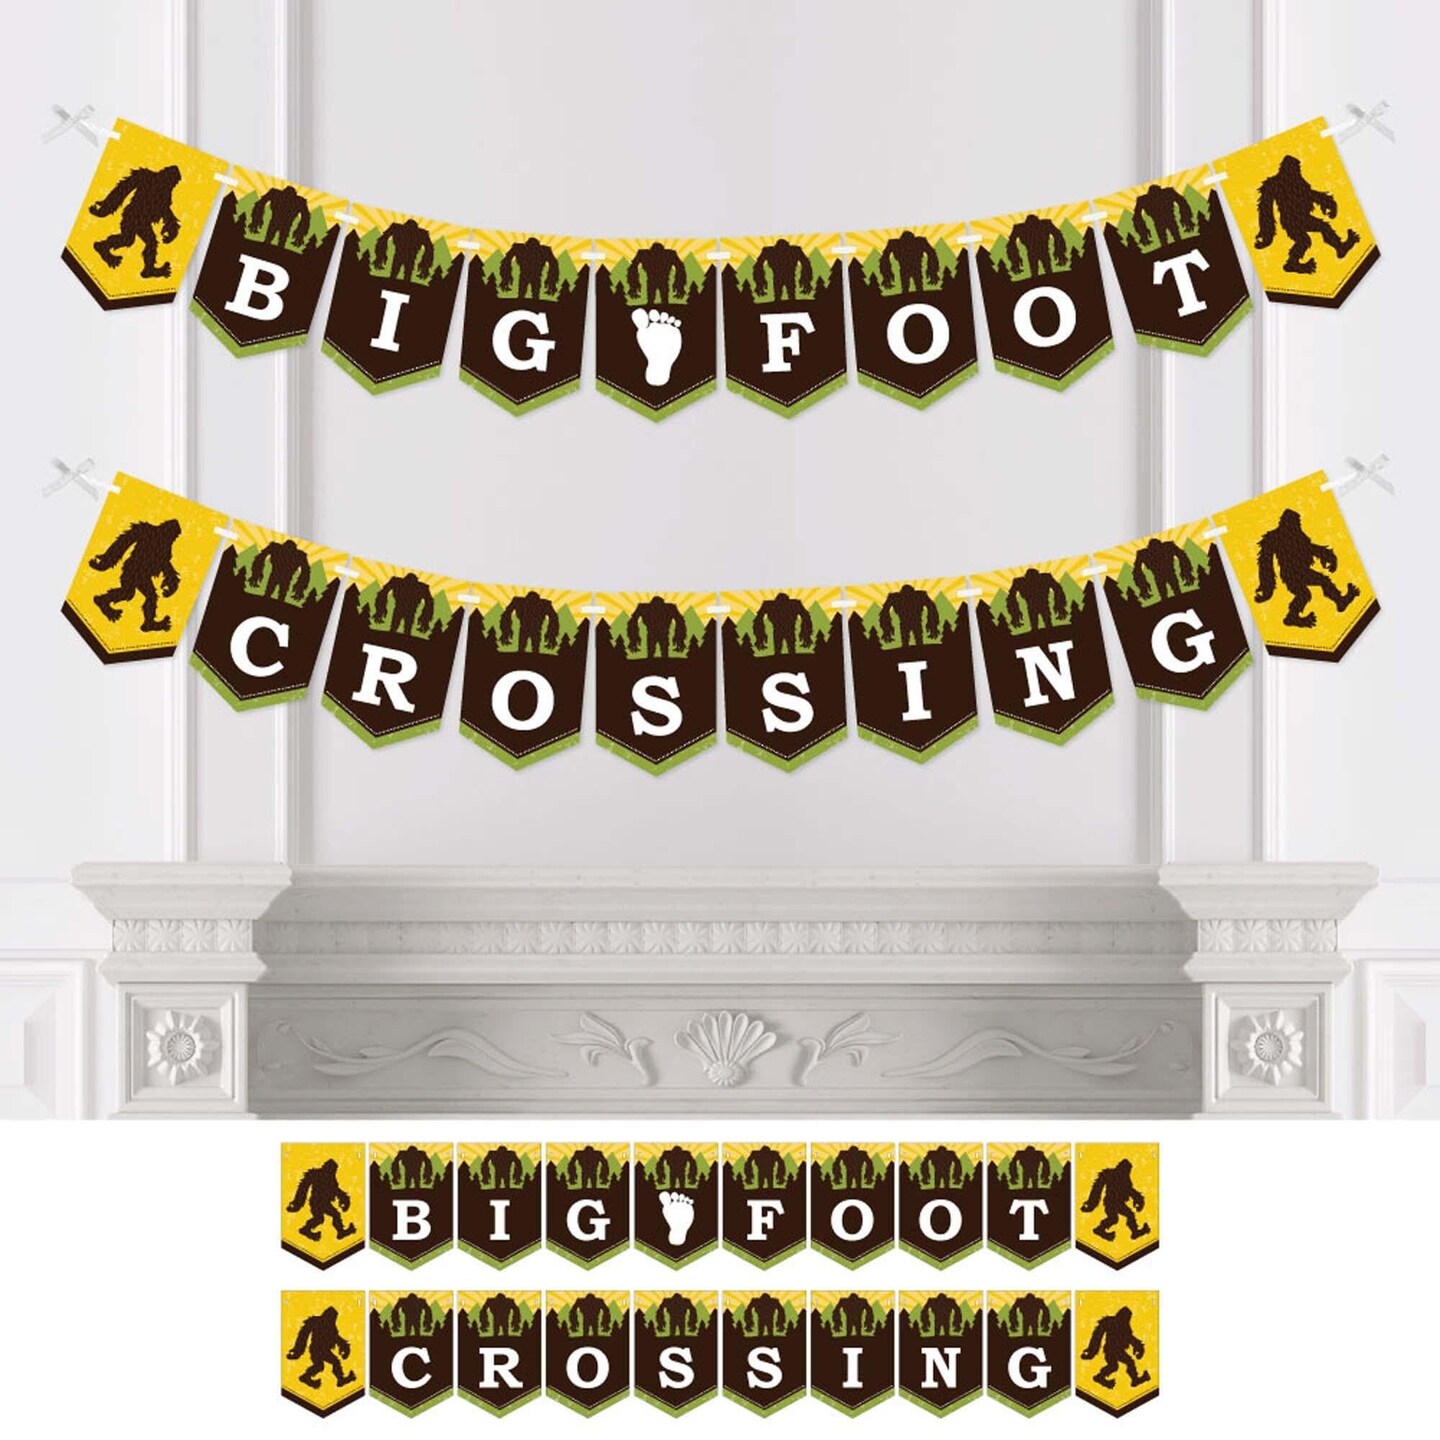 Big Dot of Happiness Sasquatch Crossing - Bigfoot Party or Birthday Party Bunting Banner - Party Decorations - Bigfoot Crossing